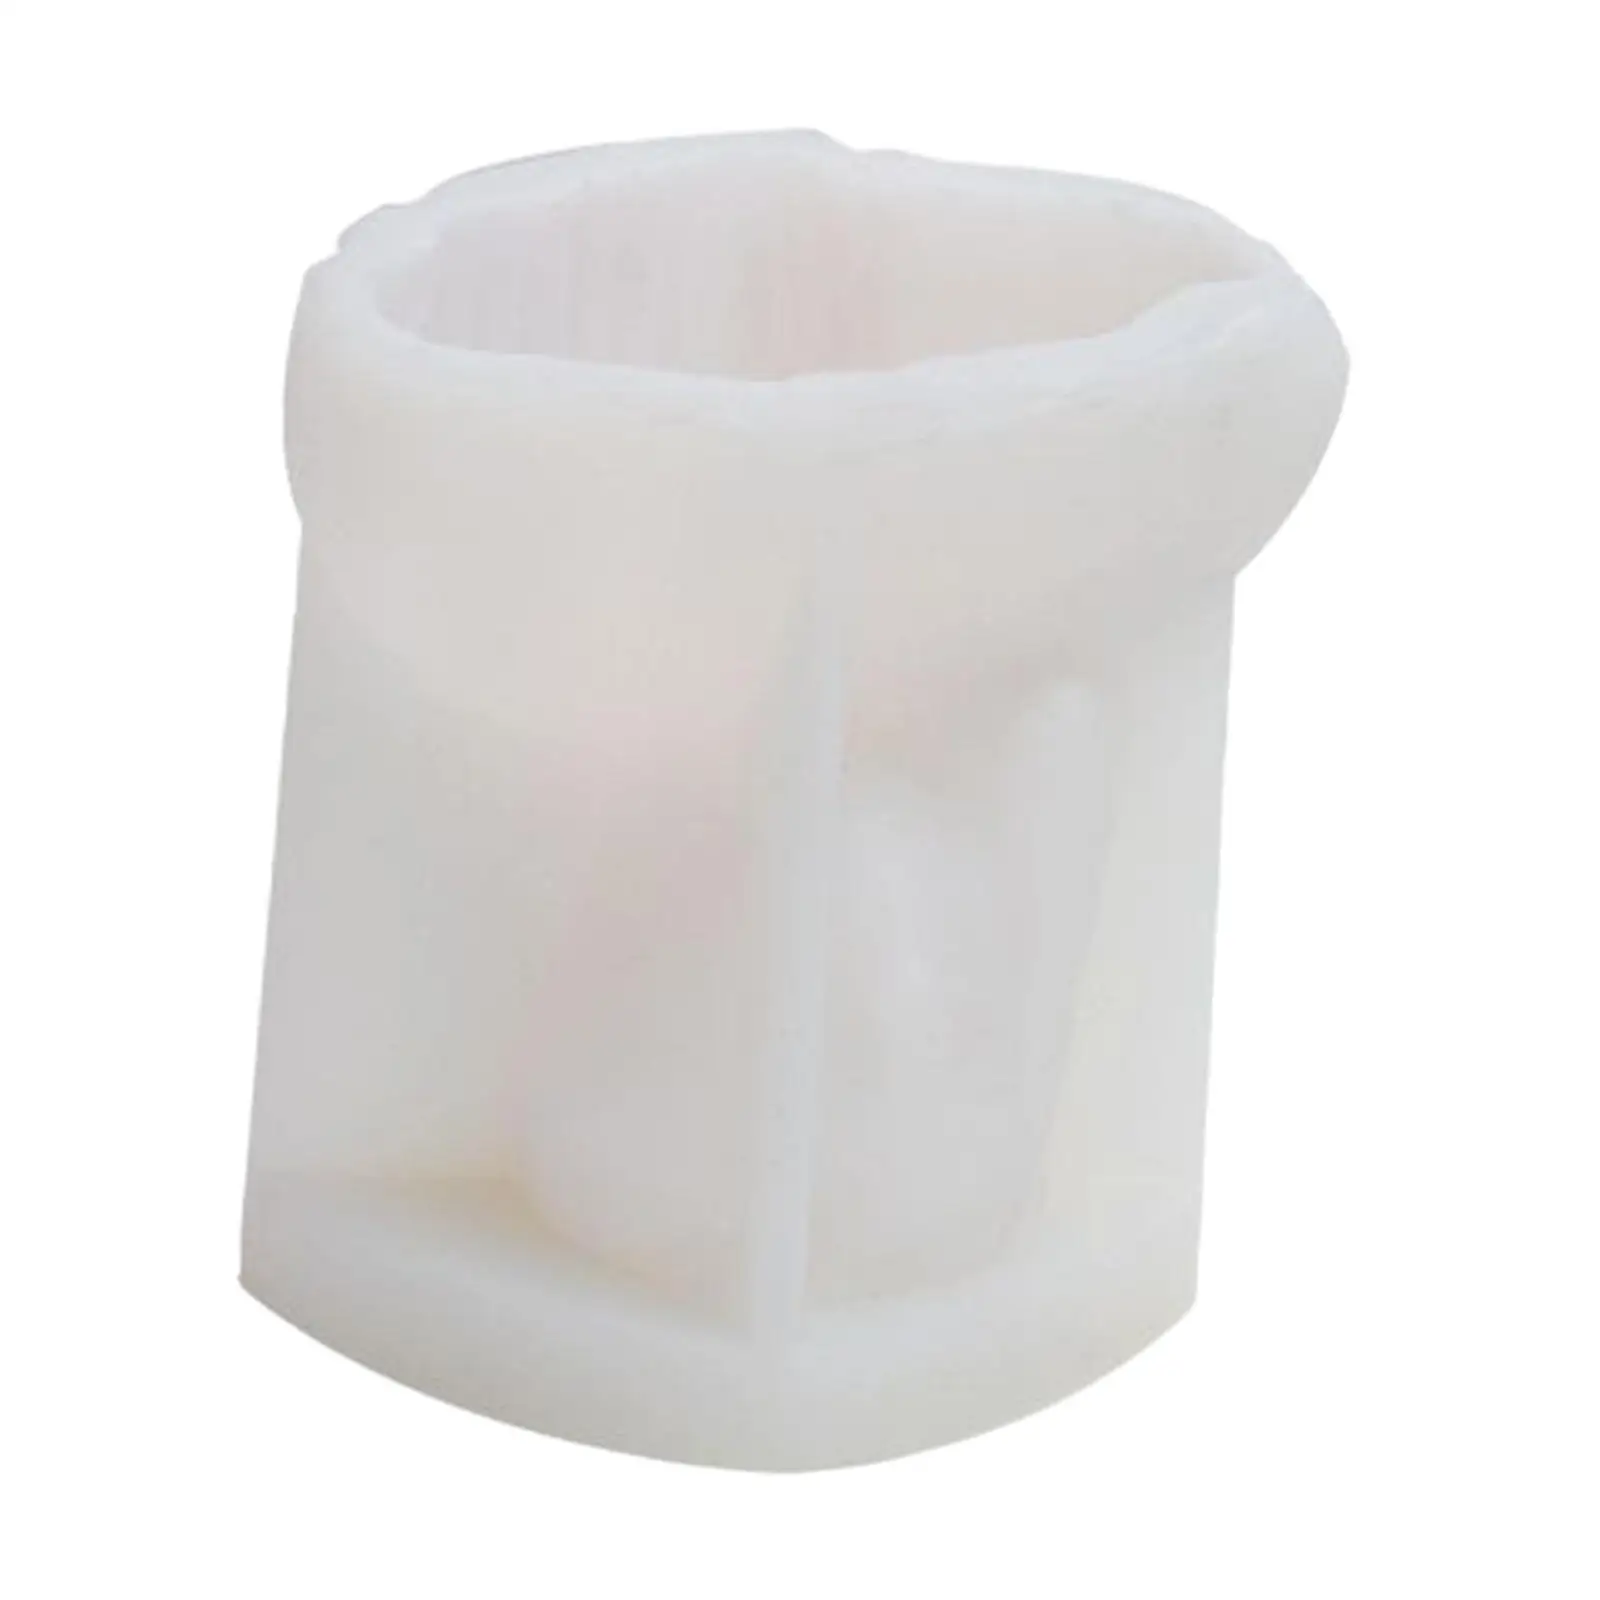 3D Silicone Candle Making Model, Epoxy Resin Cement Handmade Home Decoration DIY Soap Making Models, for Wax Making Accessories